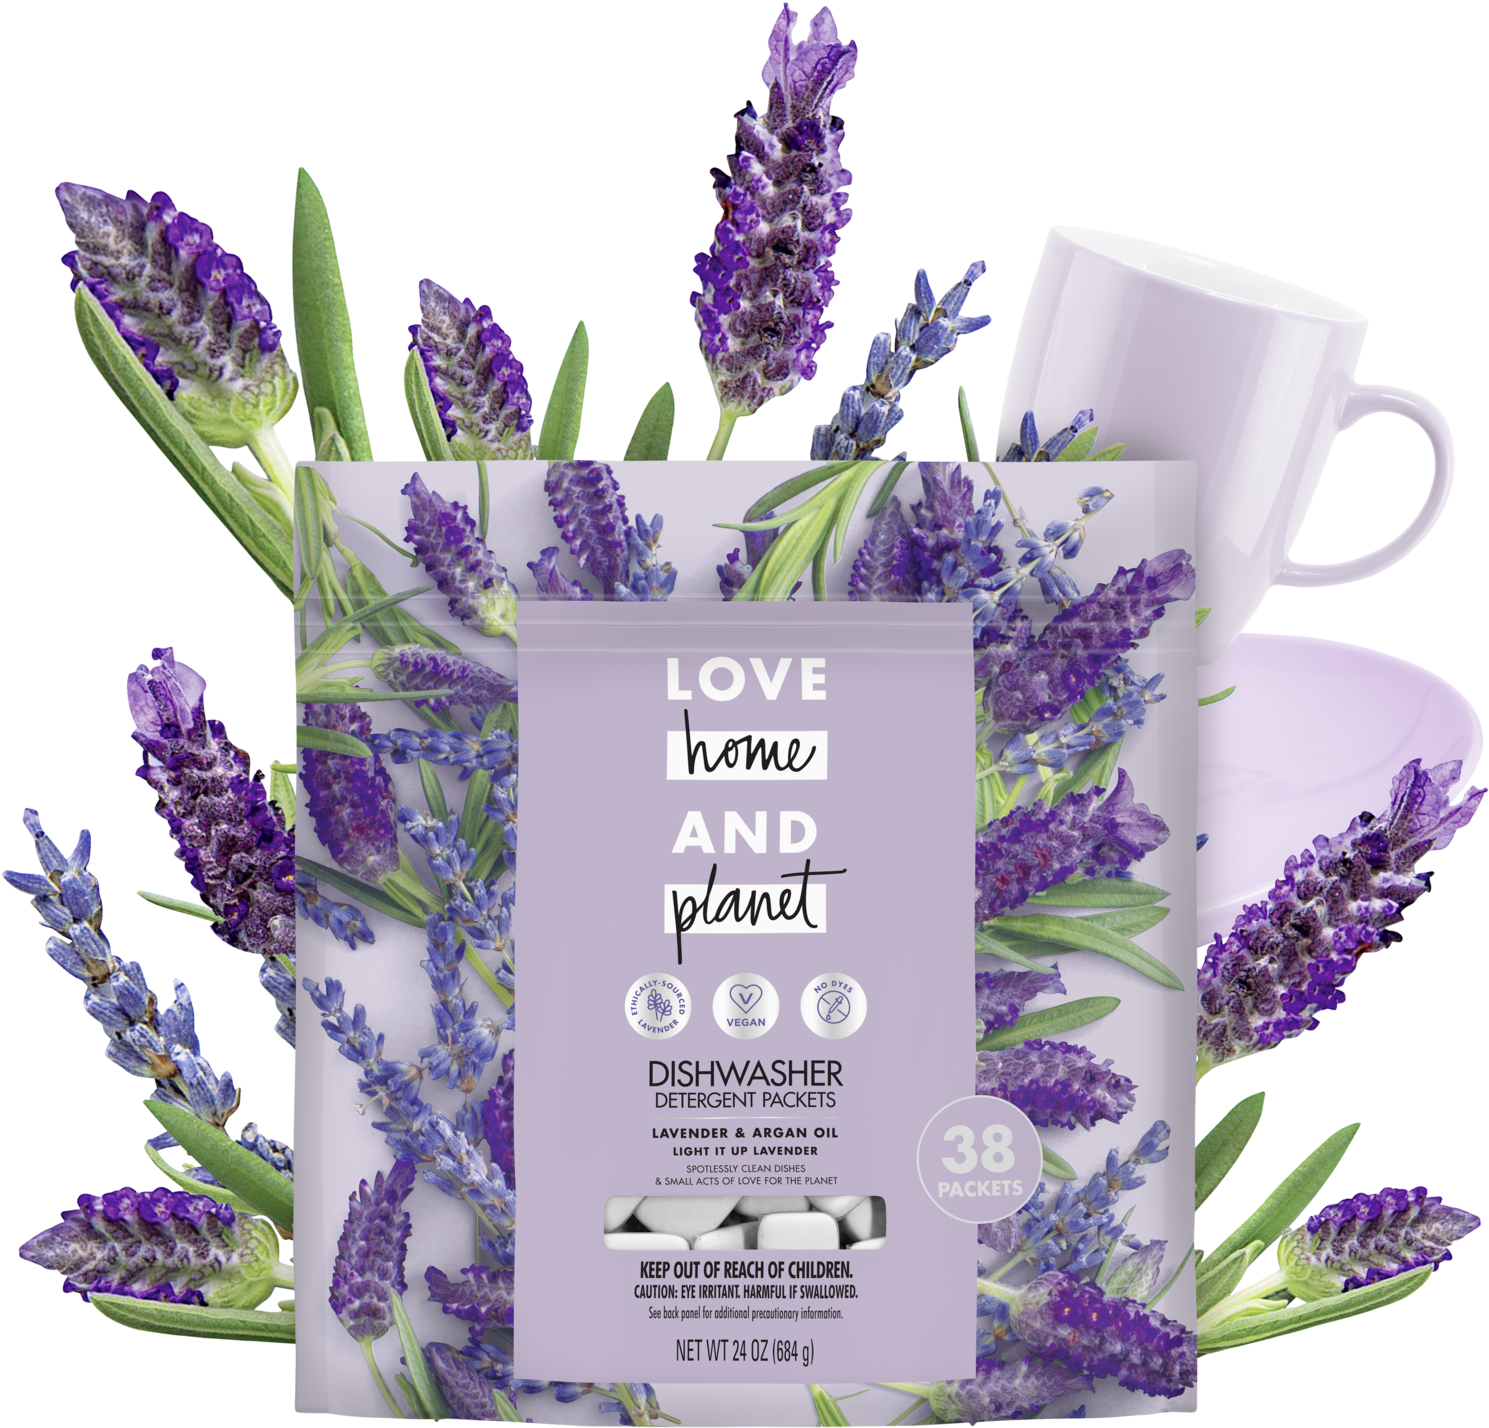 A Dishwasher Detergent Packet With Purple Flowers